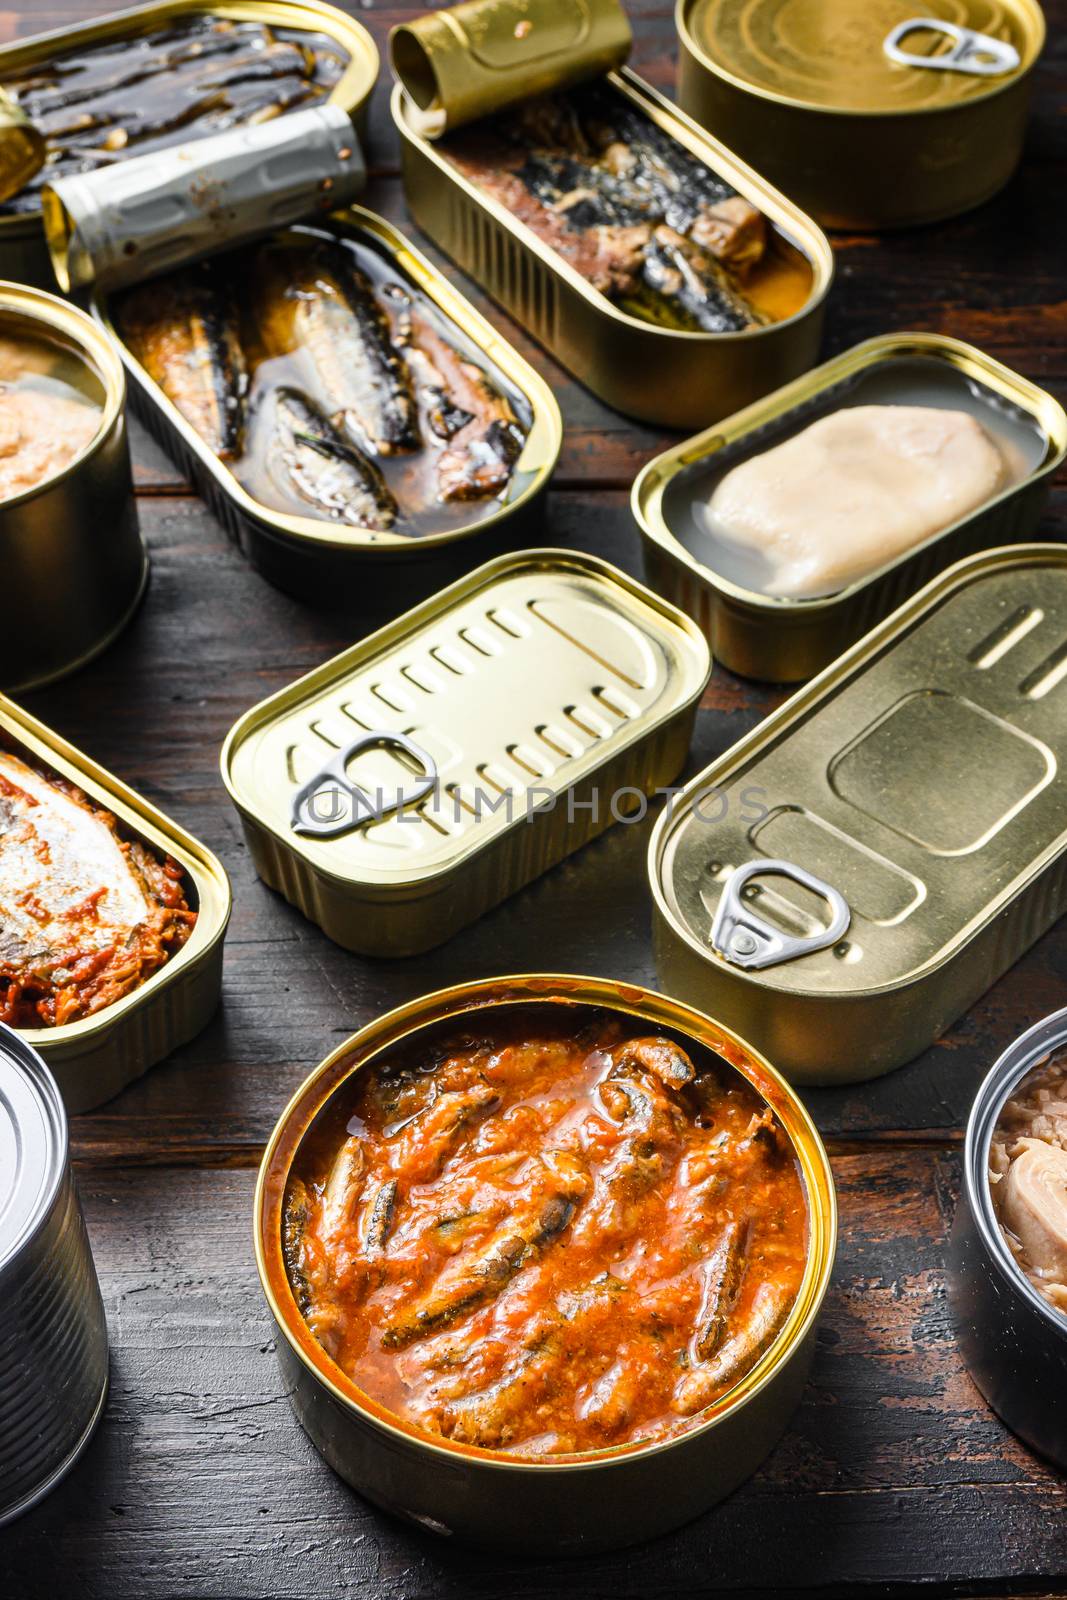 Conserves of canned fish with different types of seafood, opened and closed cans with Saury, mackerel, sprats, sardines, pilchard, squid, tuna, over dark wood old table side view, vertical.